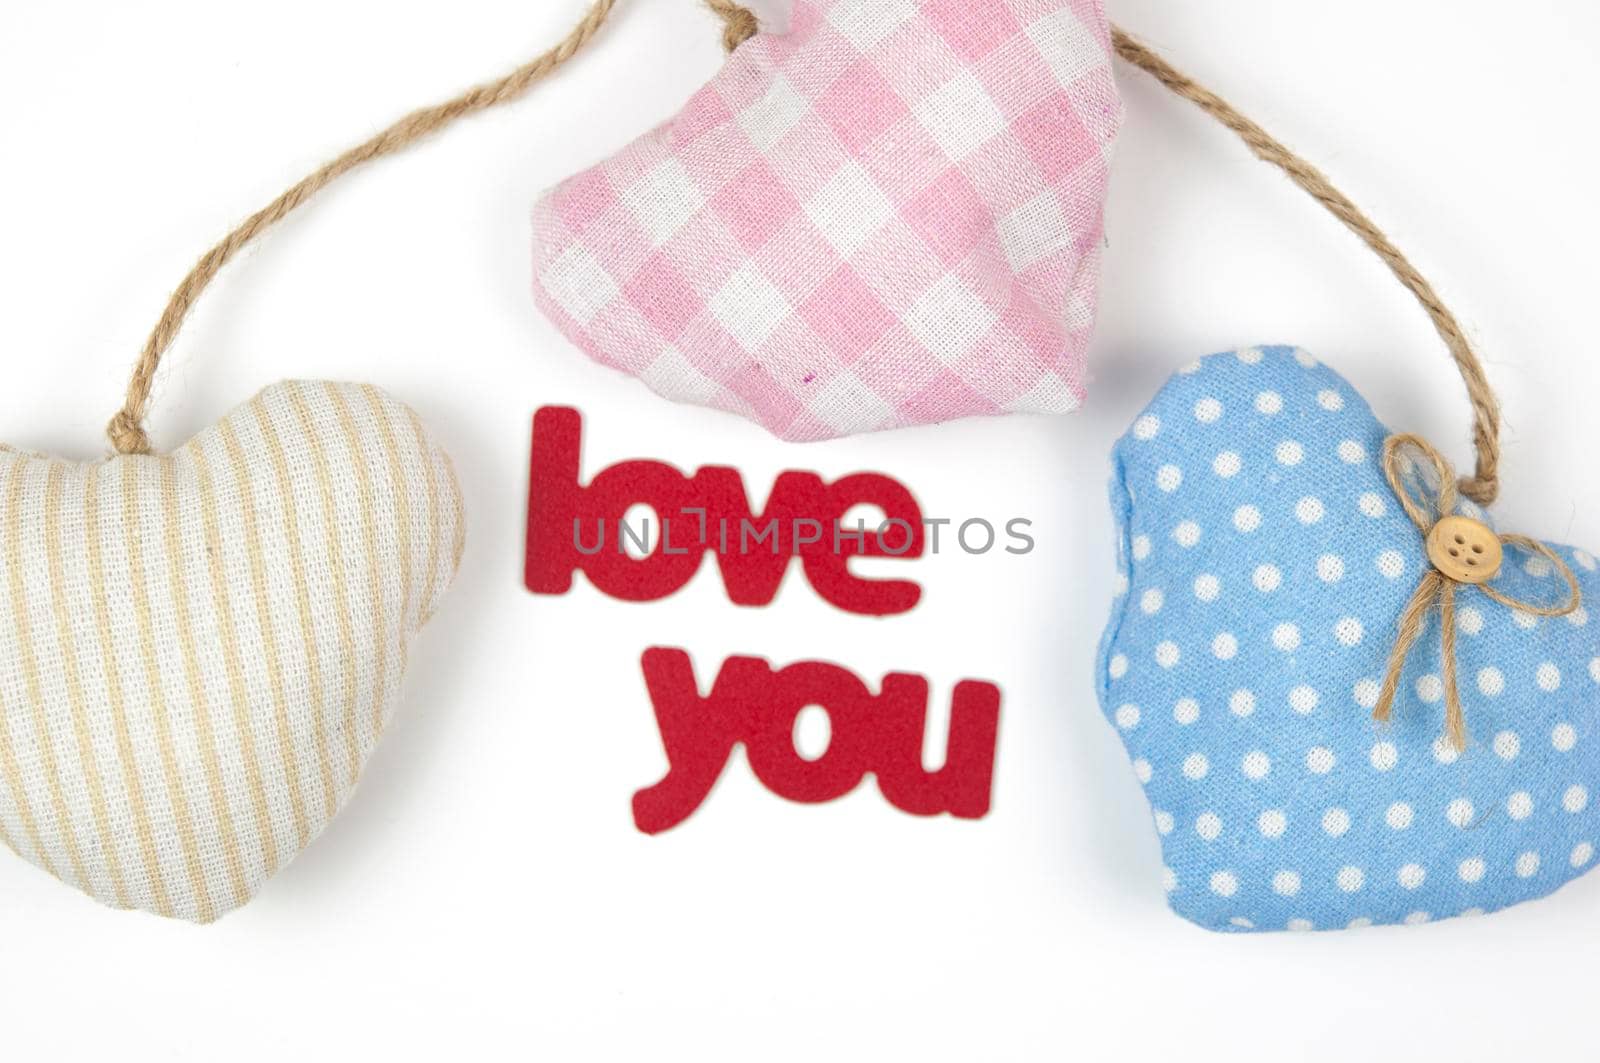 Valentine's day card. Top view cute composition with handmade fabric hearts on white paper background. Happy birthday or anniversary congratulation. Romantic message template with copy space.